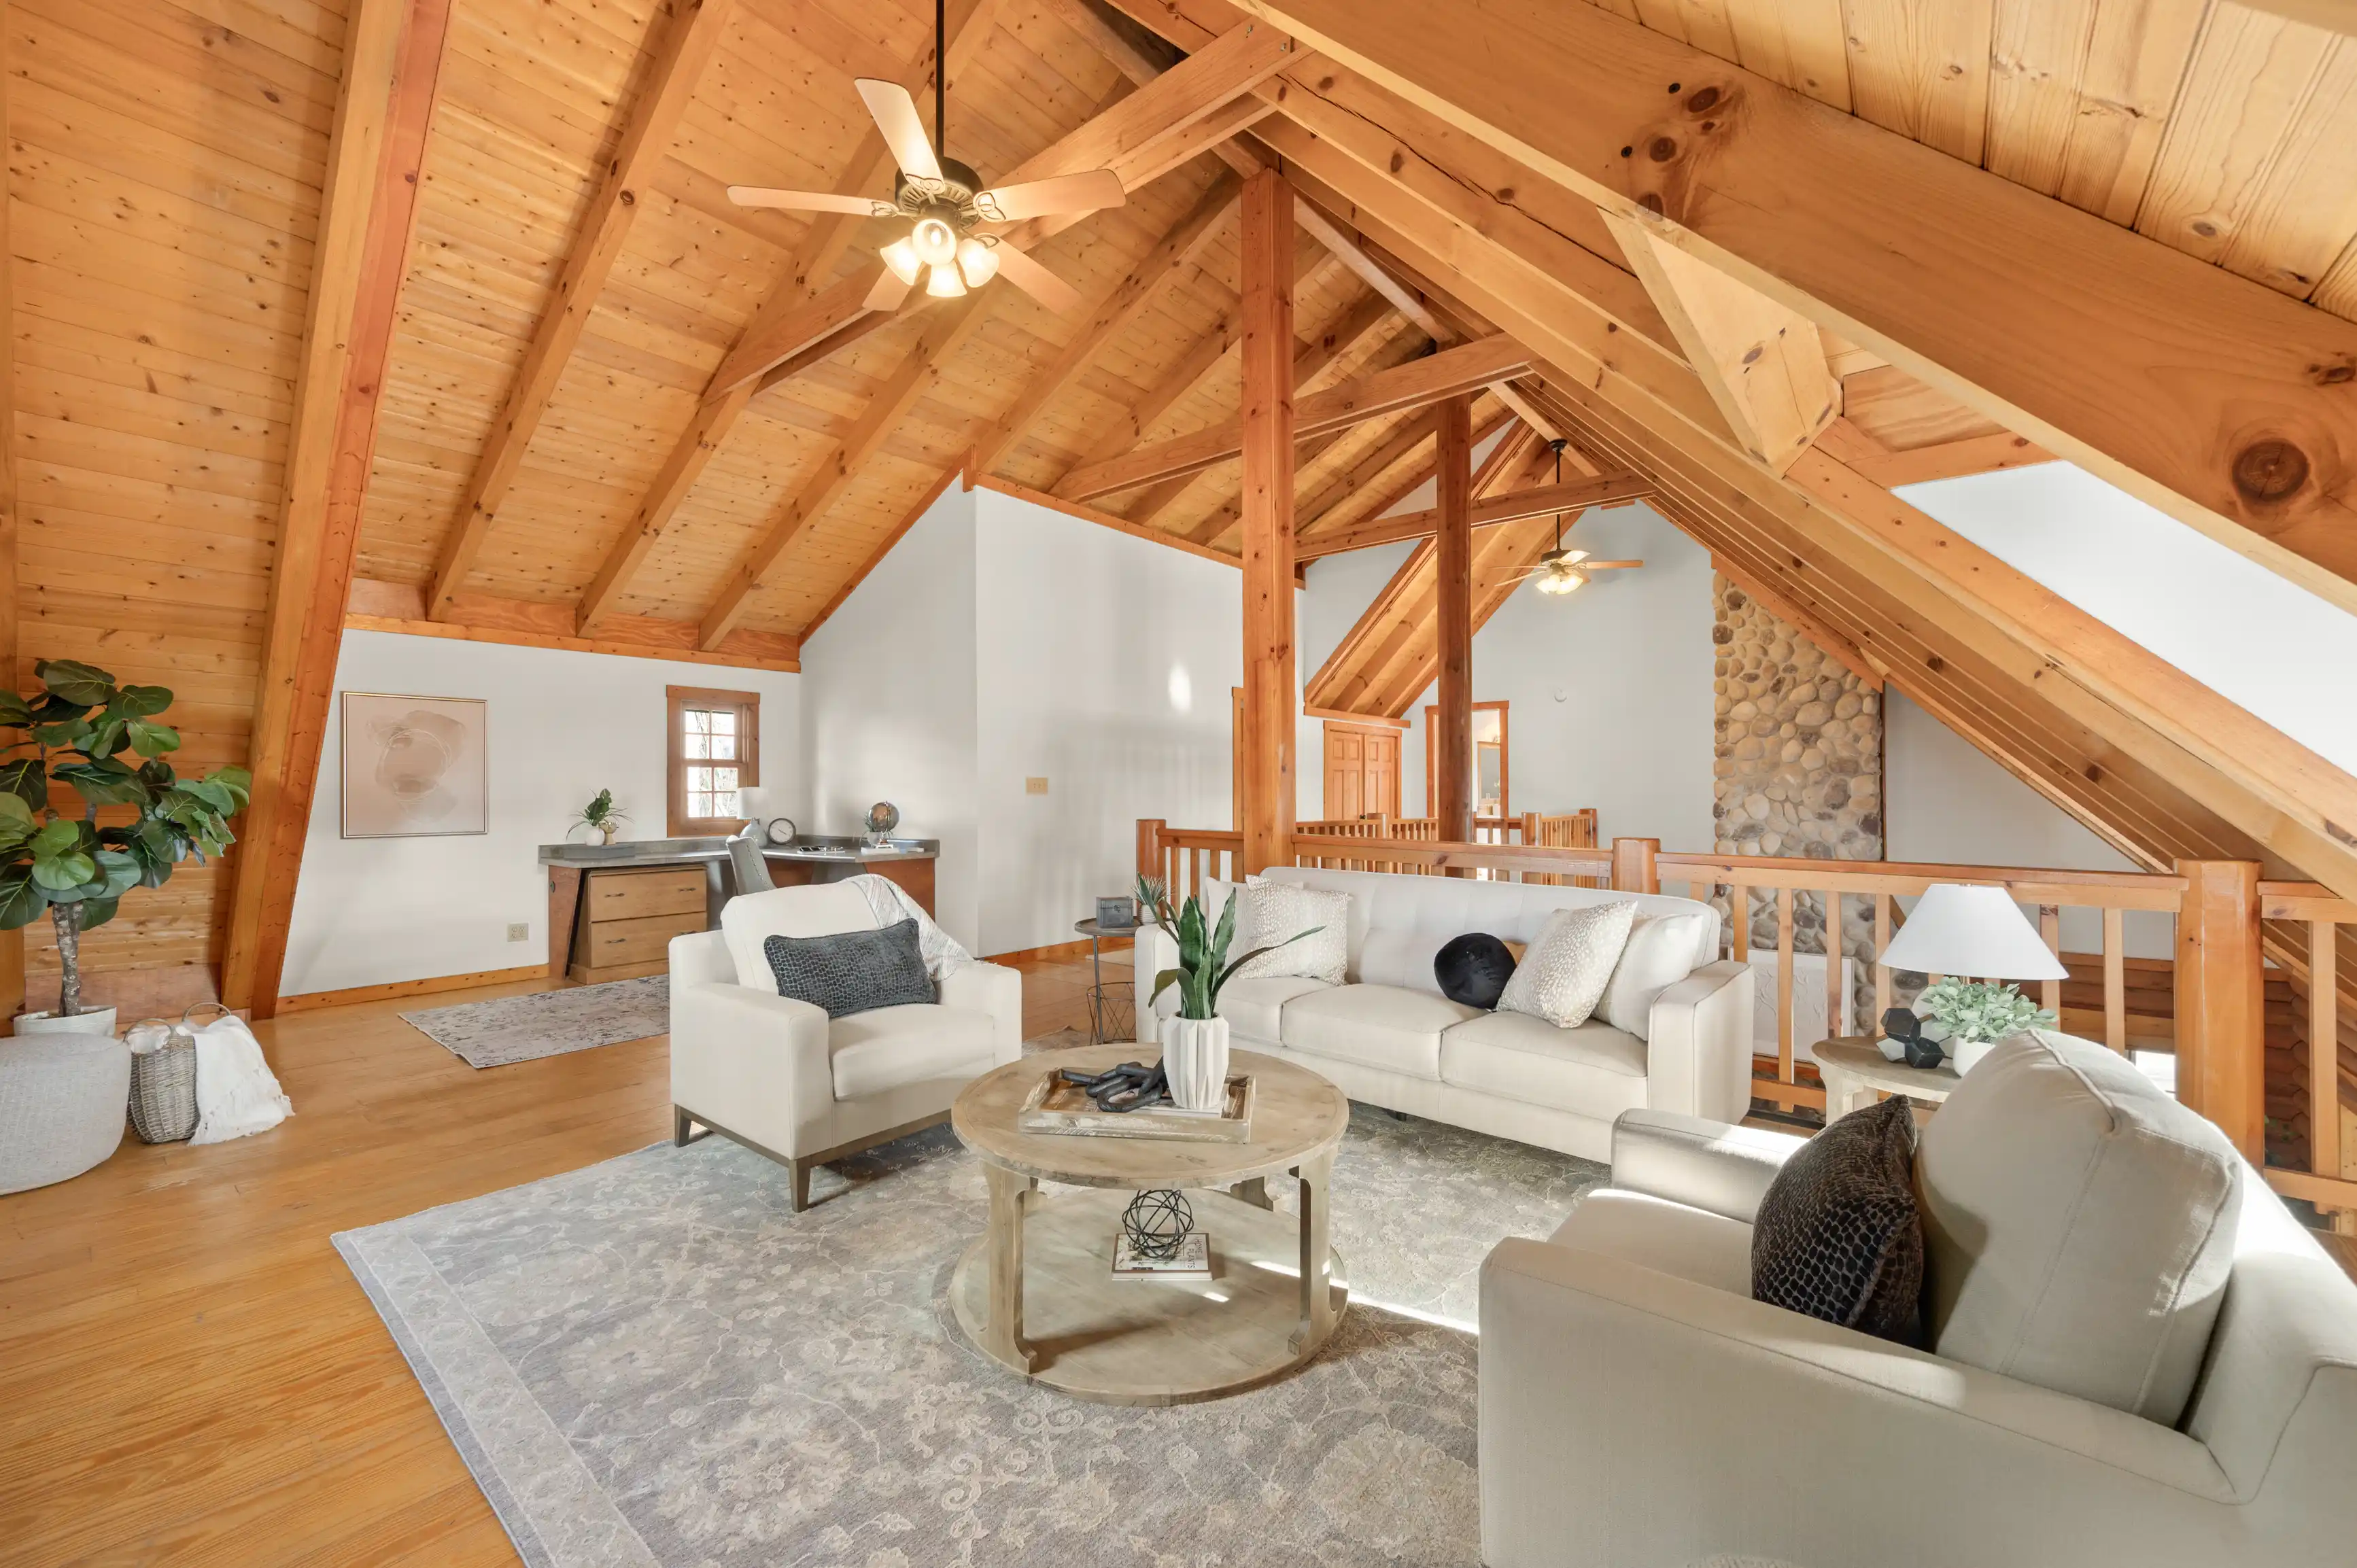 Spacious living room with high vaulted wooden ceilings, exposed beams, large windows, and comfortable furnishings including sofas and a round wooden coffee table.